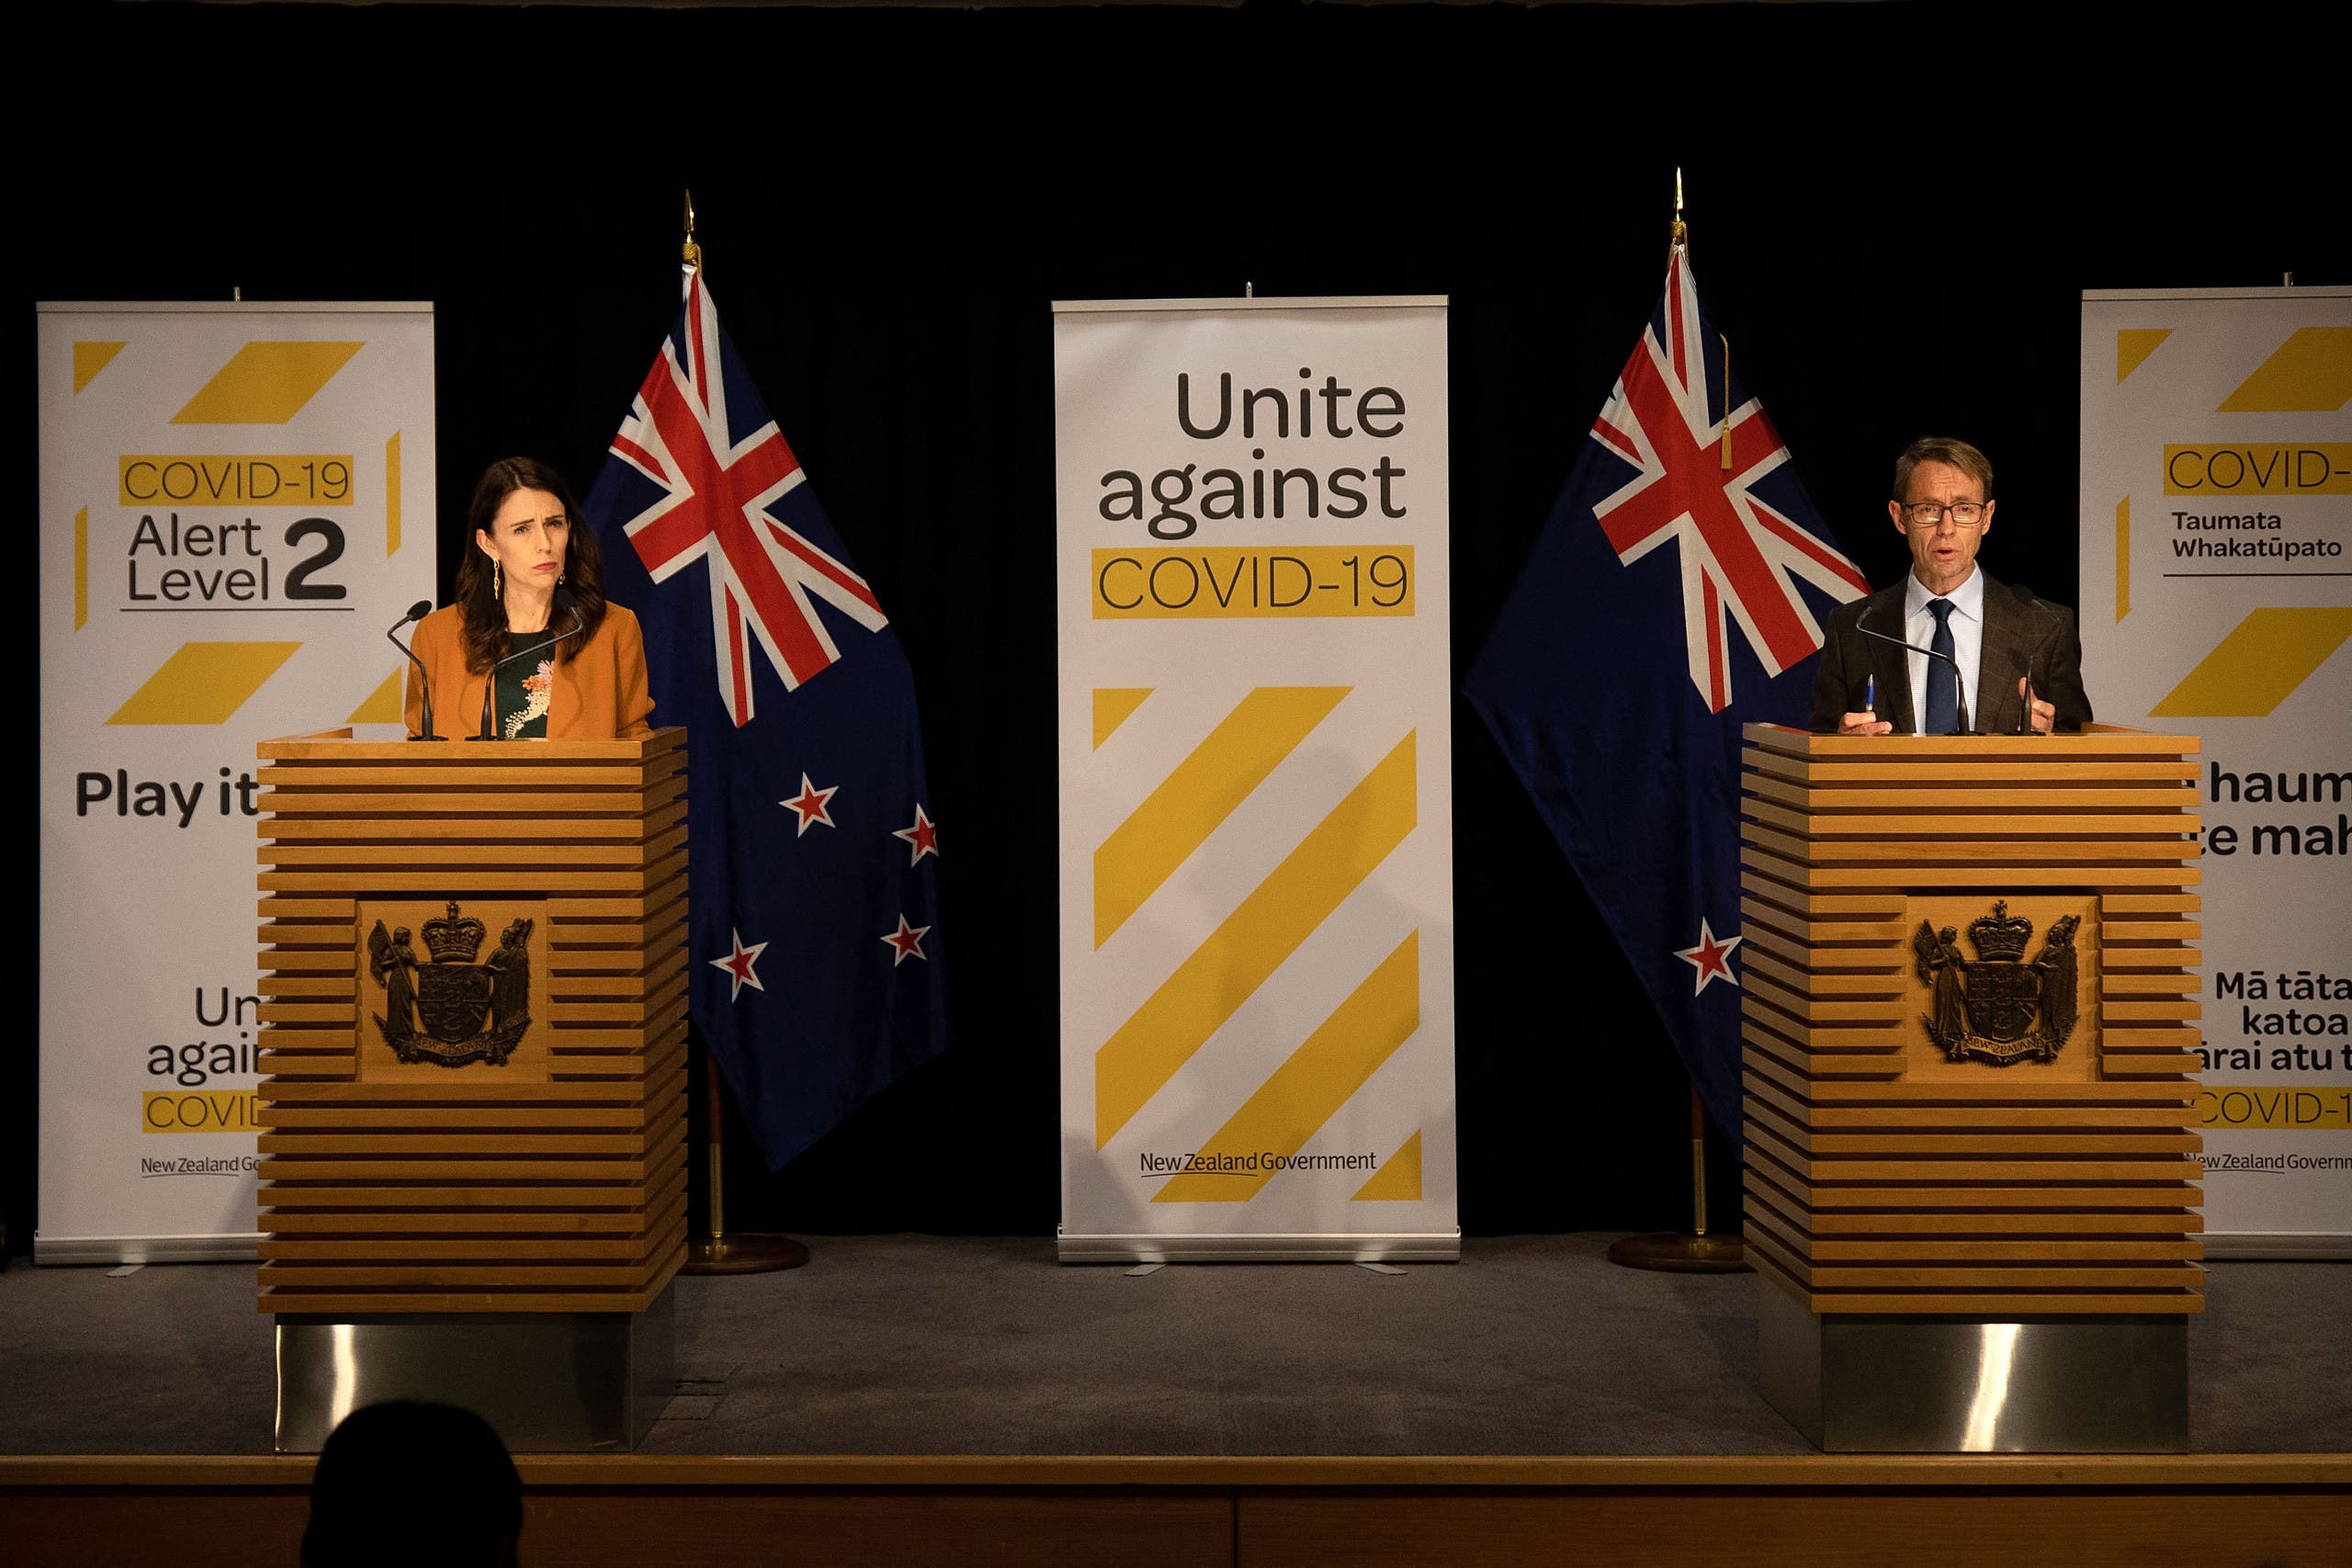 New Zealand's Prime Minister Jacinda Ardern (L) and New Zealand's health department director-general Ashley Bloomfield (R) take part in a press conference about the COVID-19 coronavirus at Parliament in Wellington on June 8, 2020. (File photo: AFP)